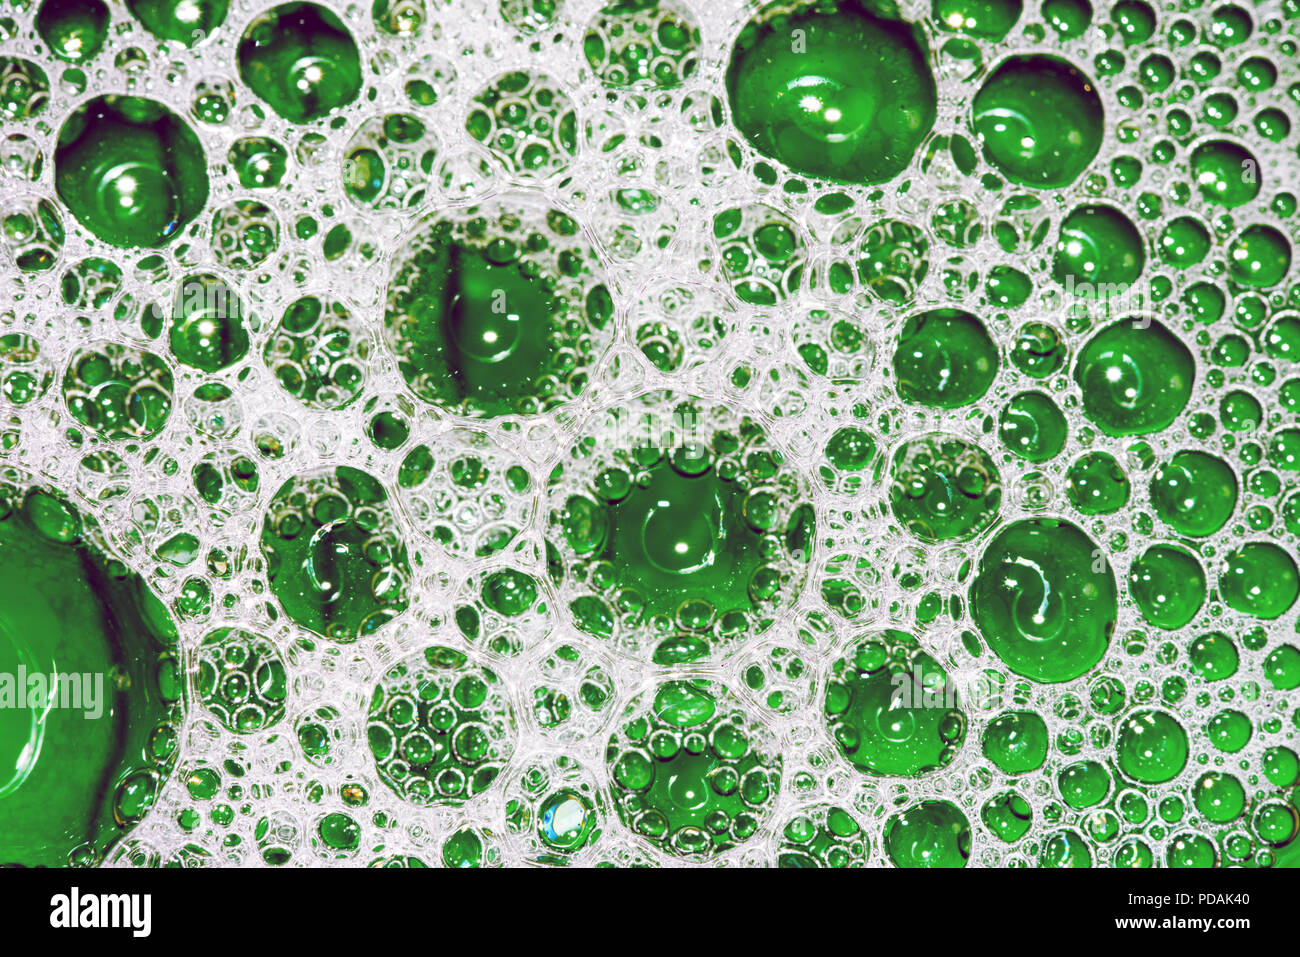 White soap bubbles and suds creating frothy foam on the surface of green water with air pockets of many tiny silver domes on the liquid. Copyspace are Stock Photo